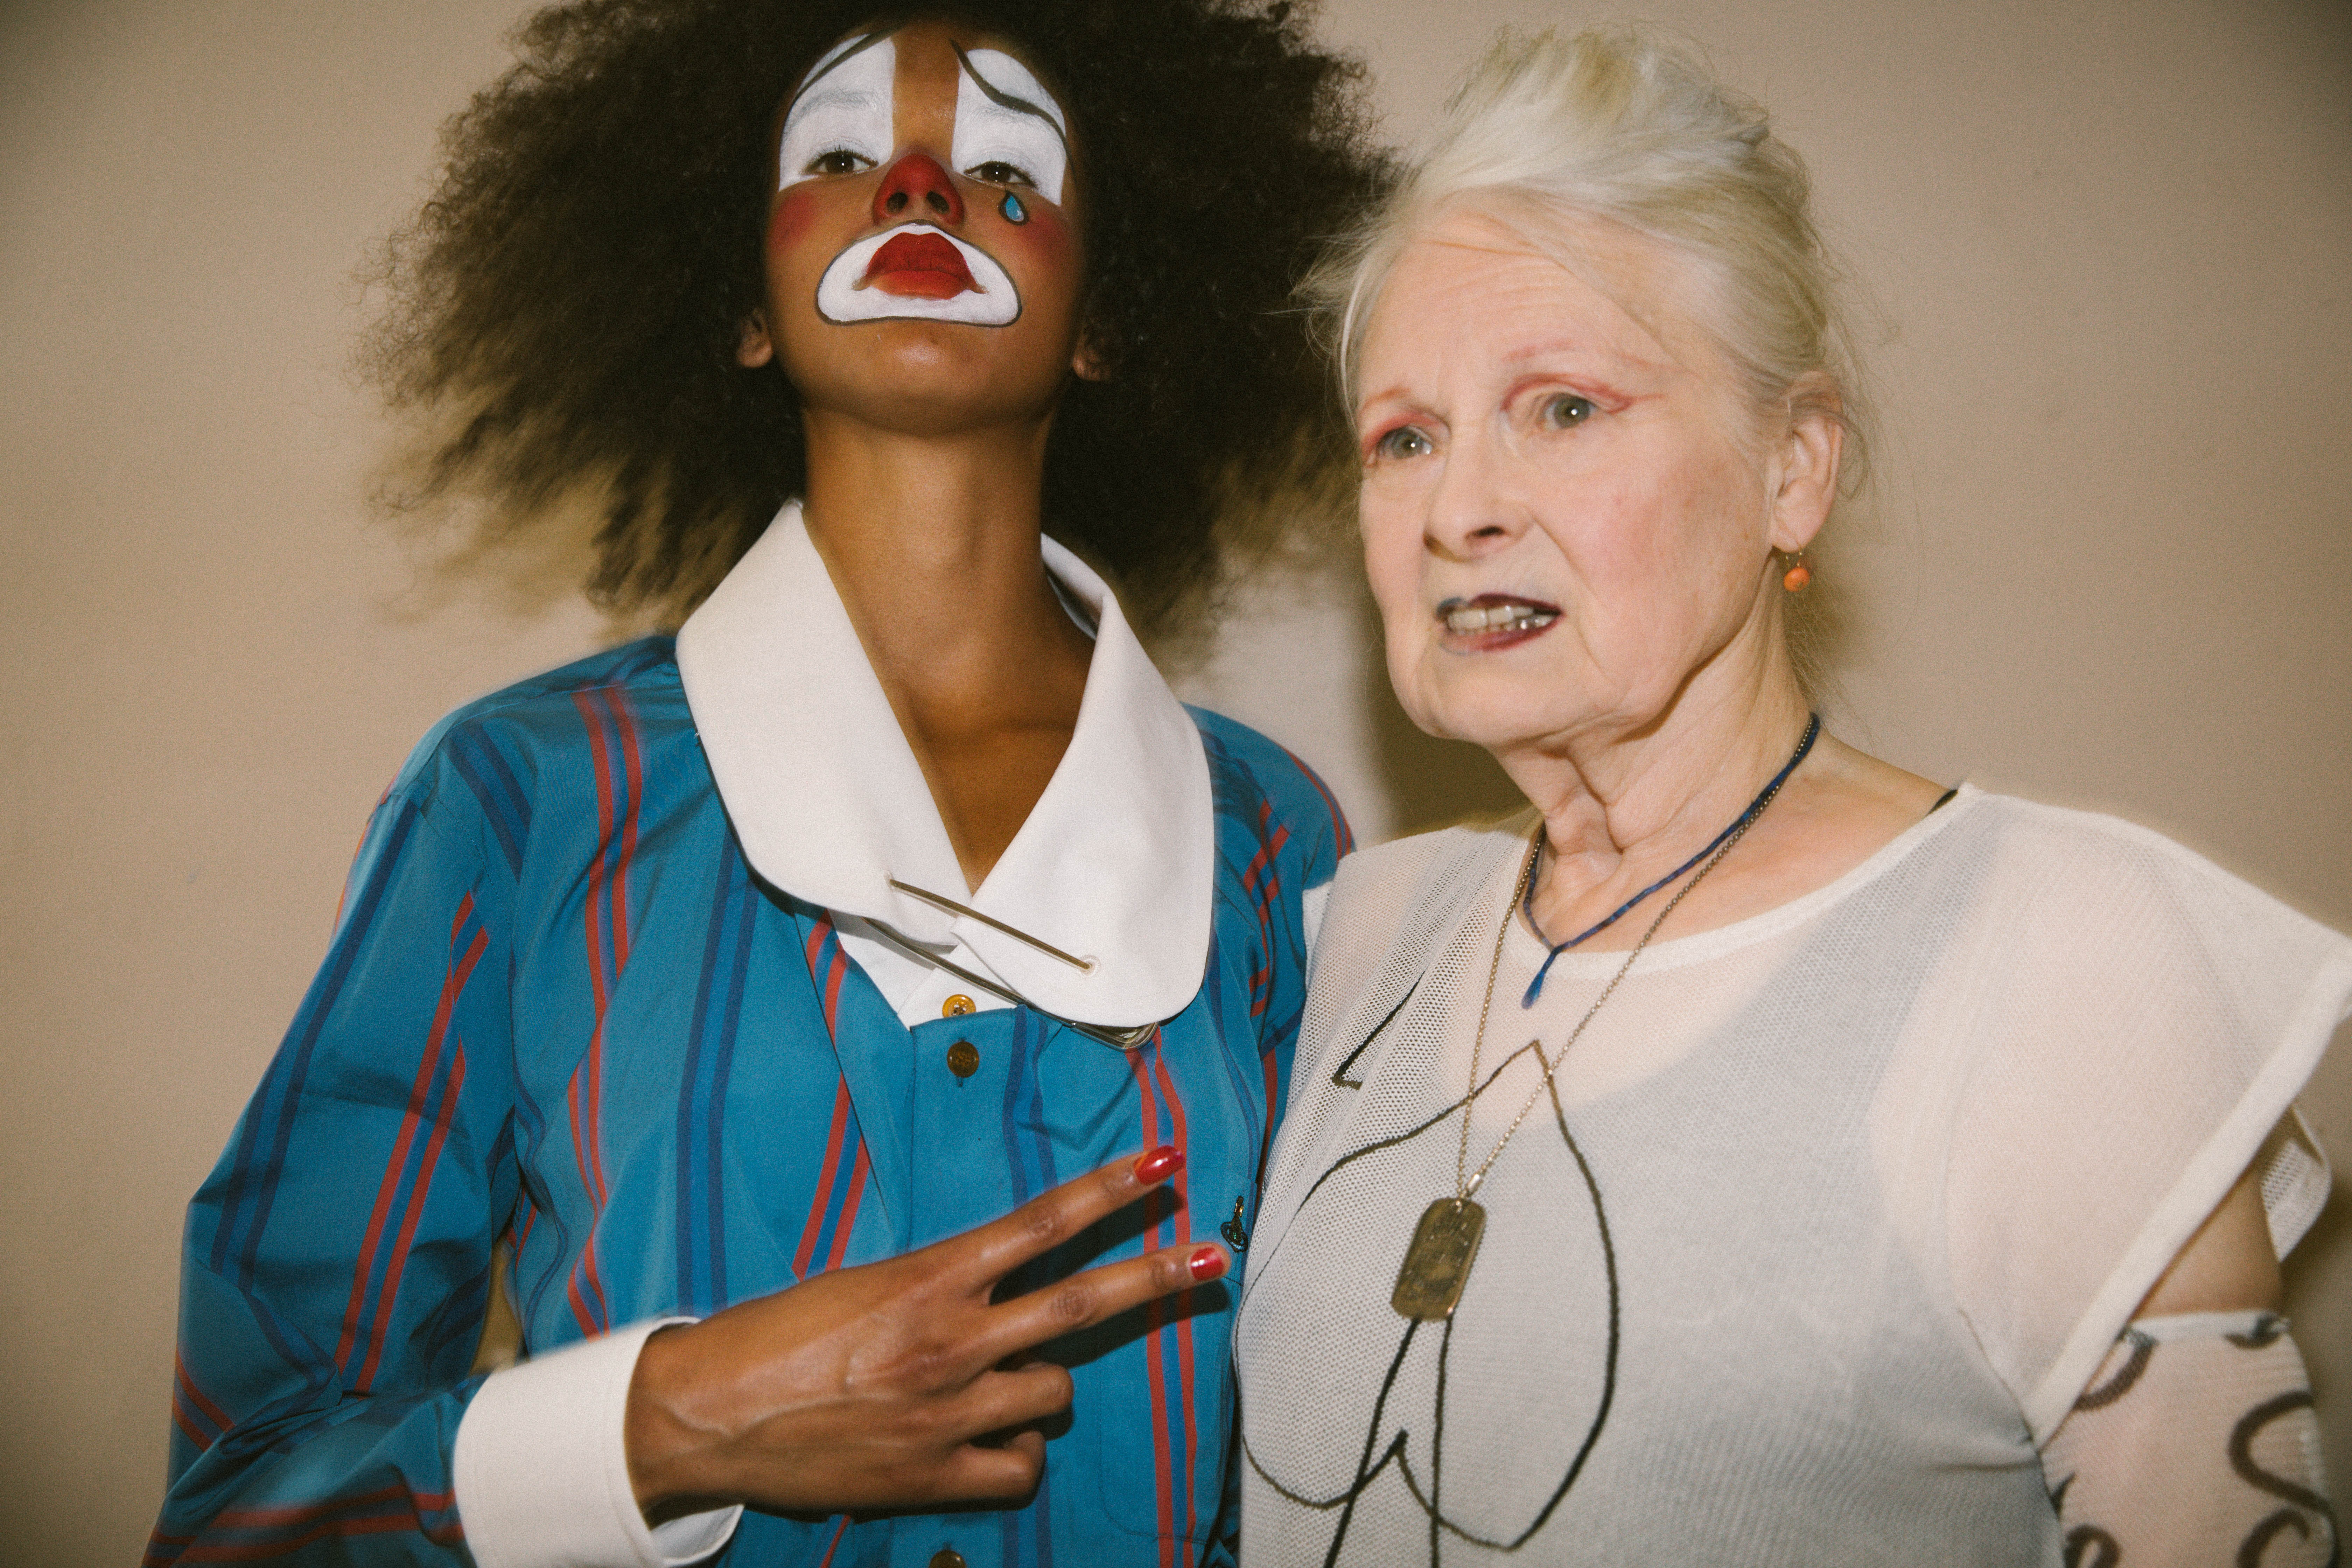 VIVIENNE WESTWOOD, THE REAL ACTIVIST OF THE WORLD OF FASHION